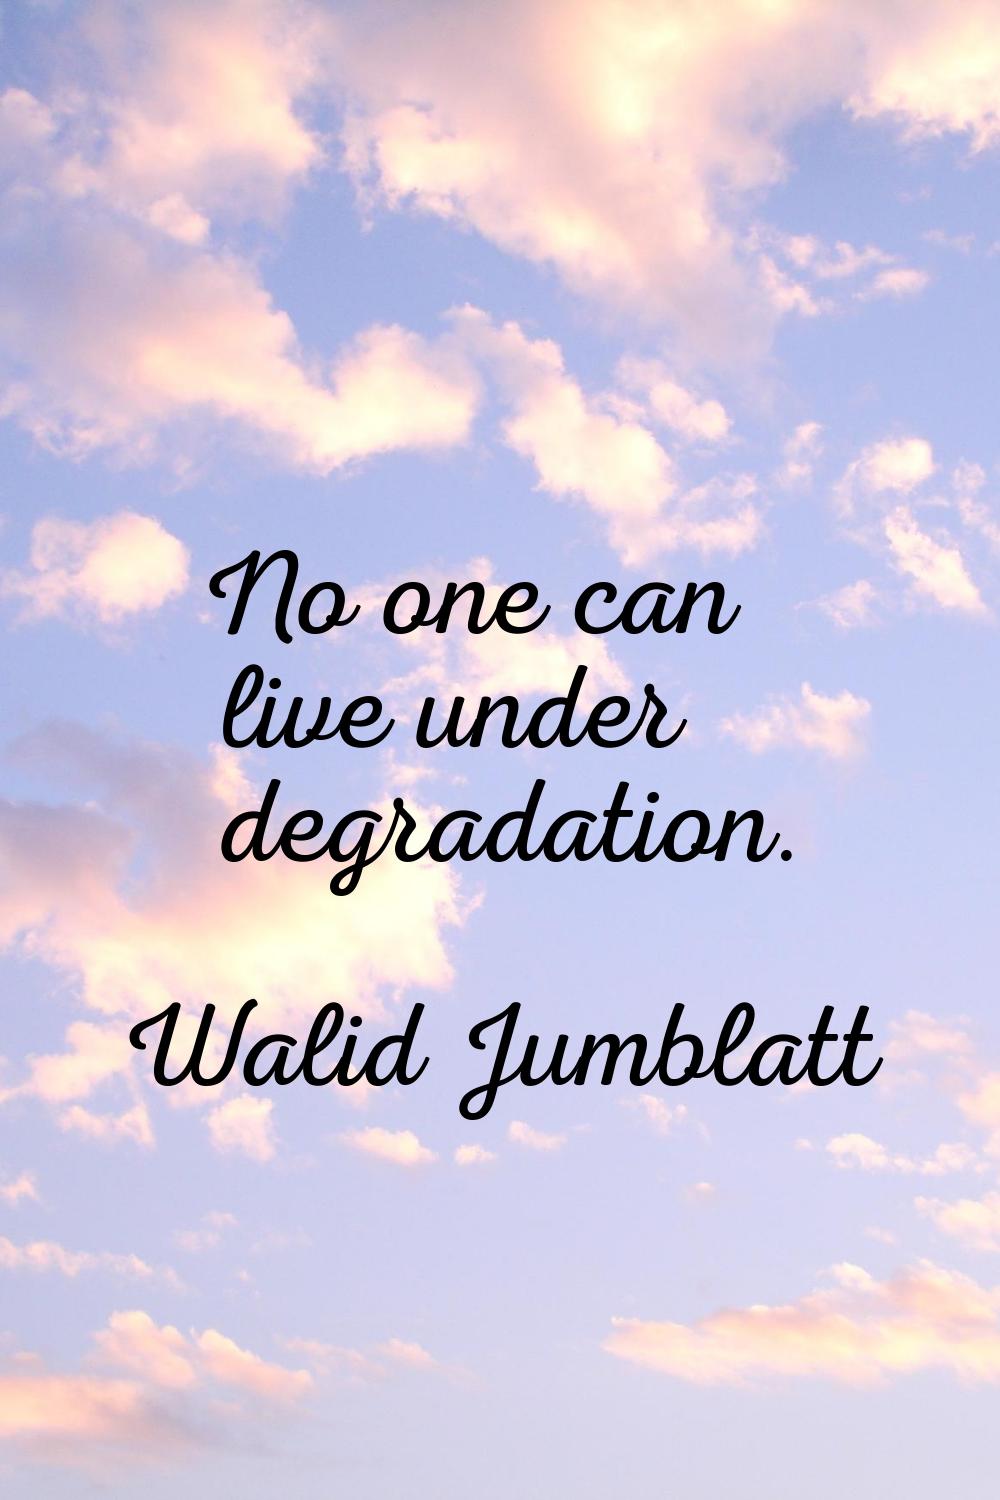 No one can live under degradation.